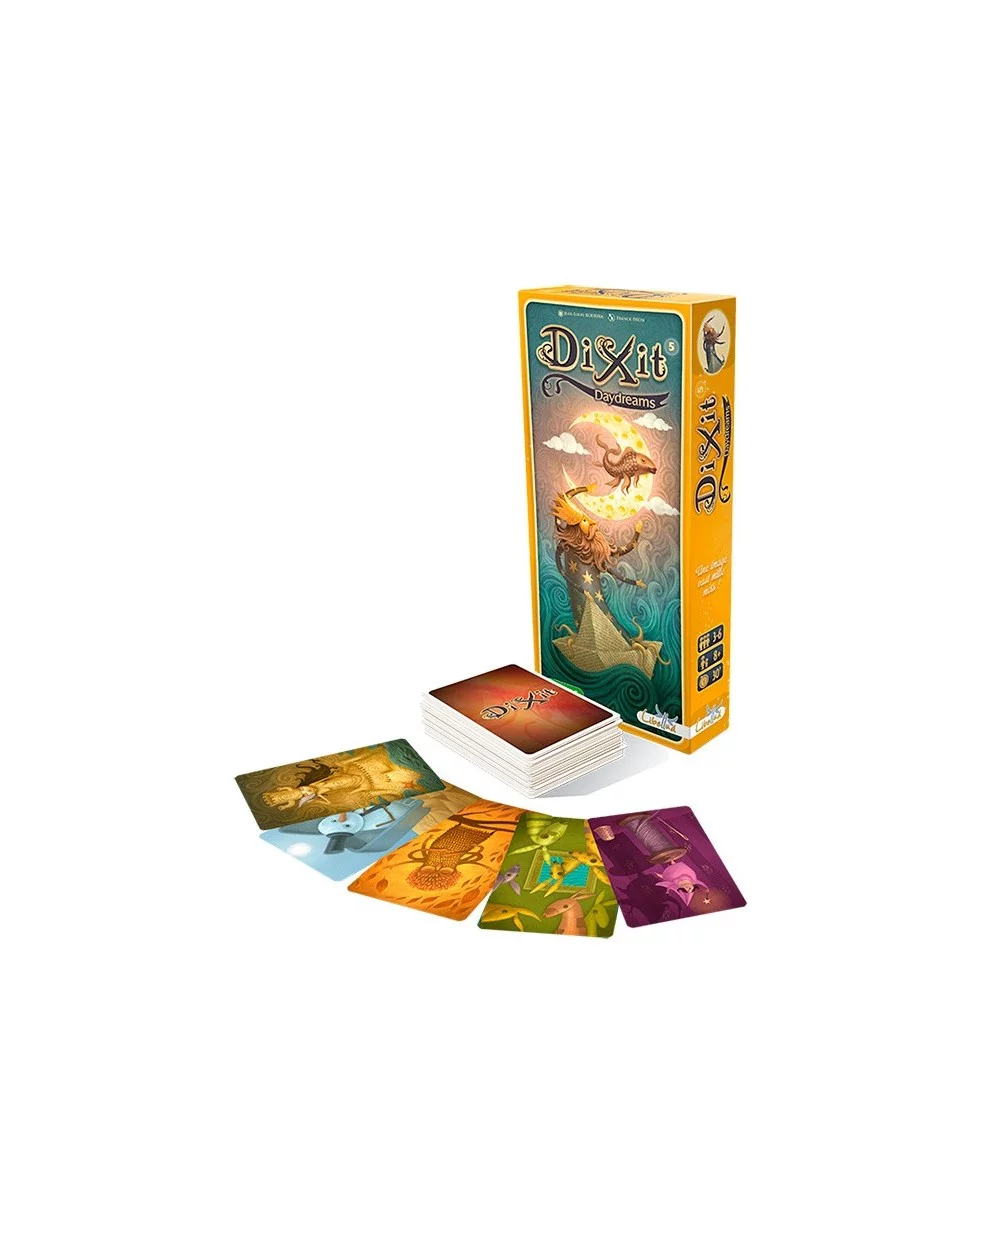 Dixit Daydreams Espansione 5 Asmodee